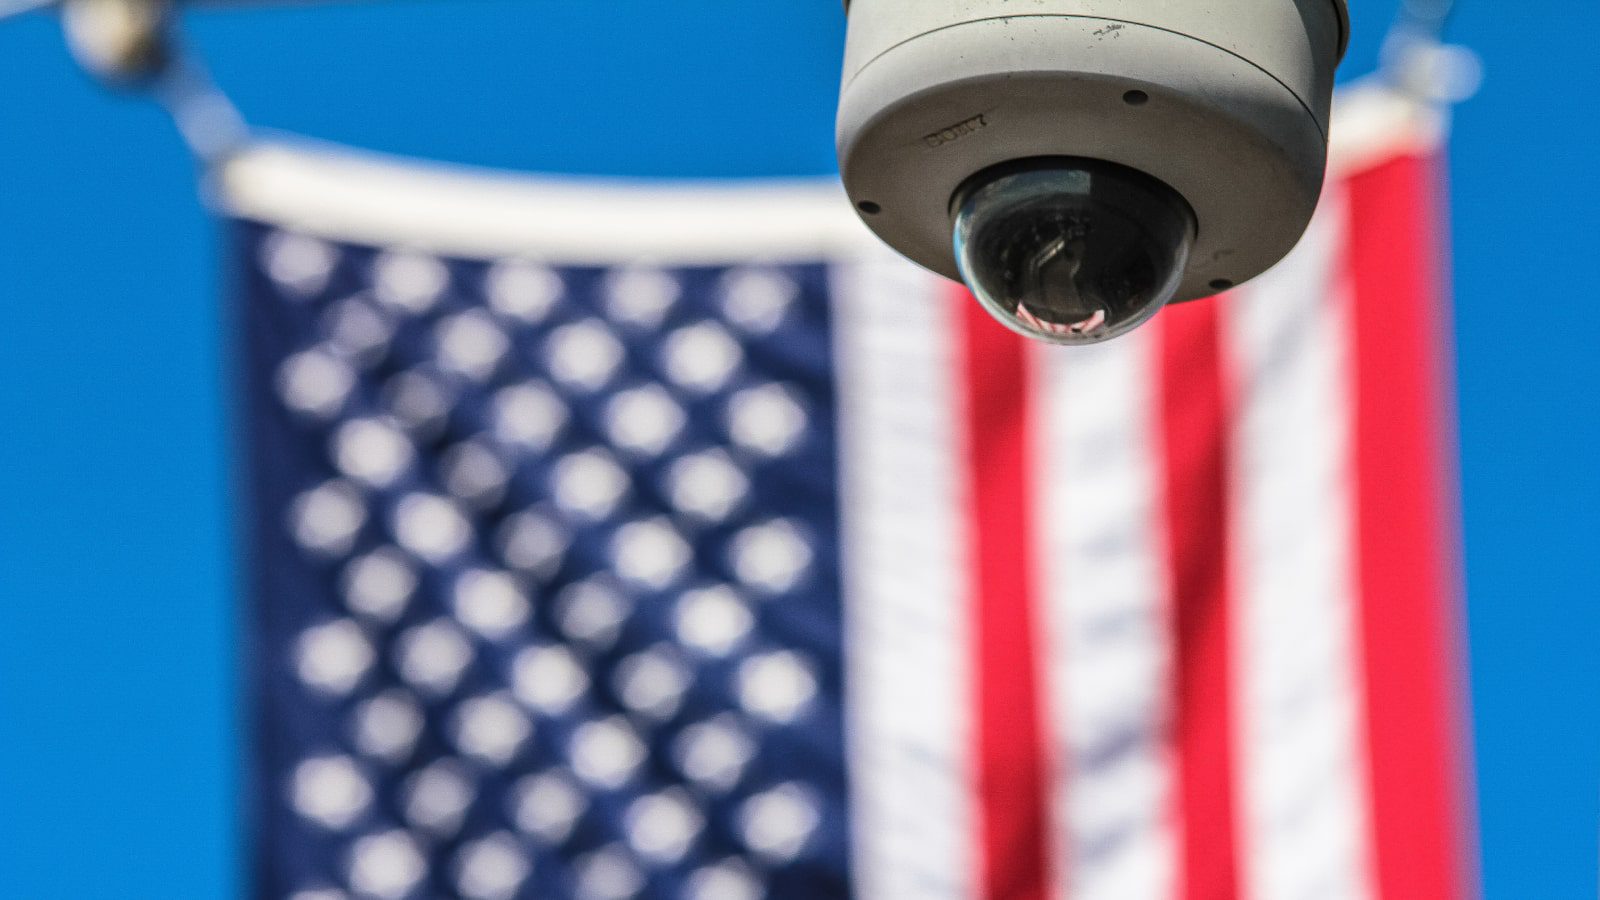 A security camera in front of an American flag.